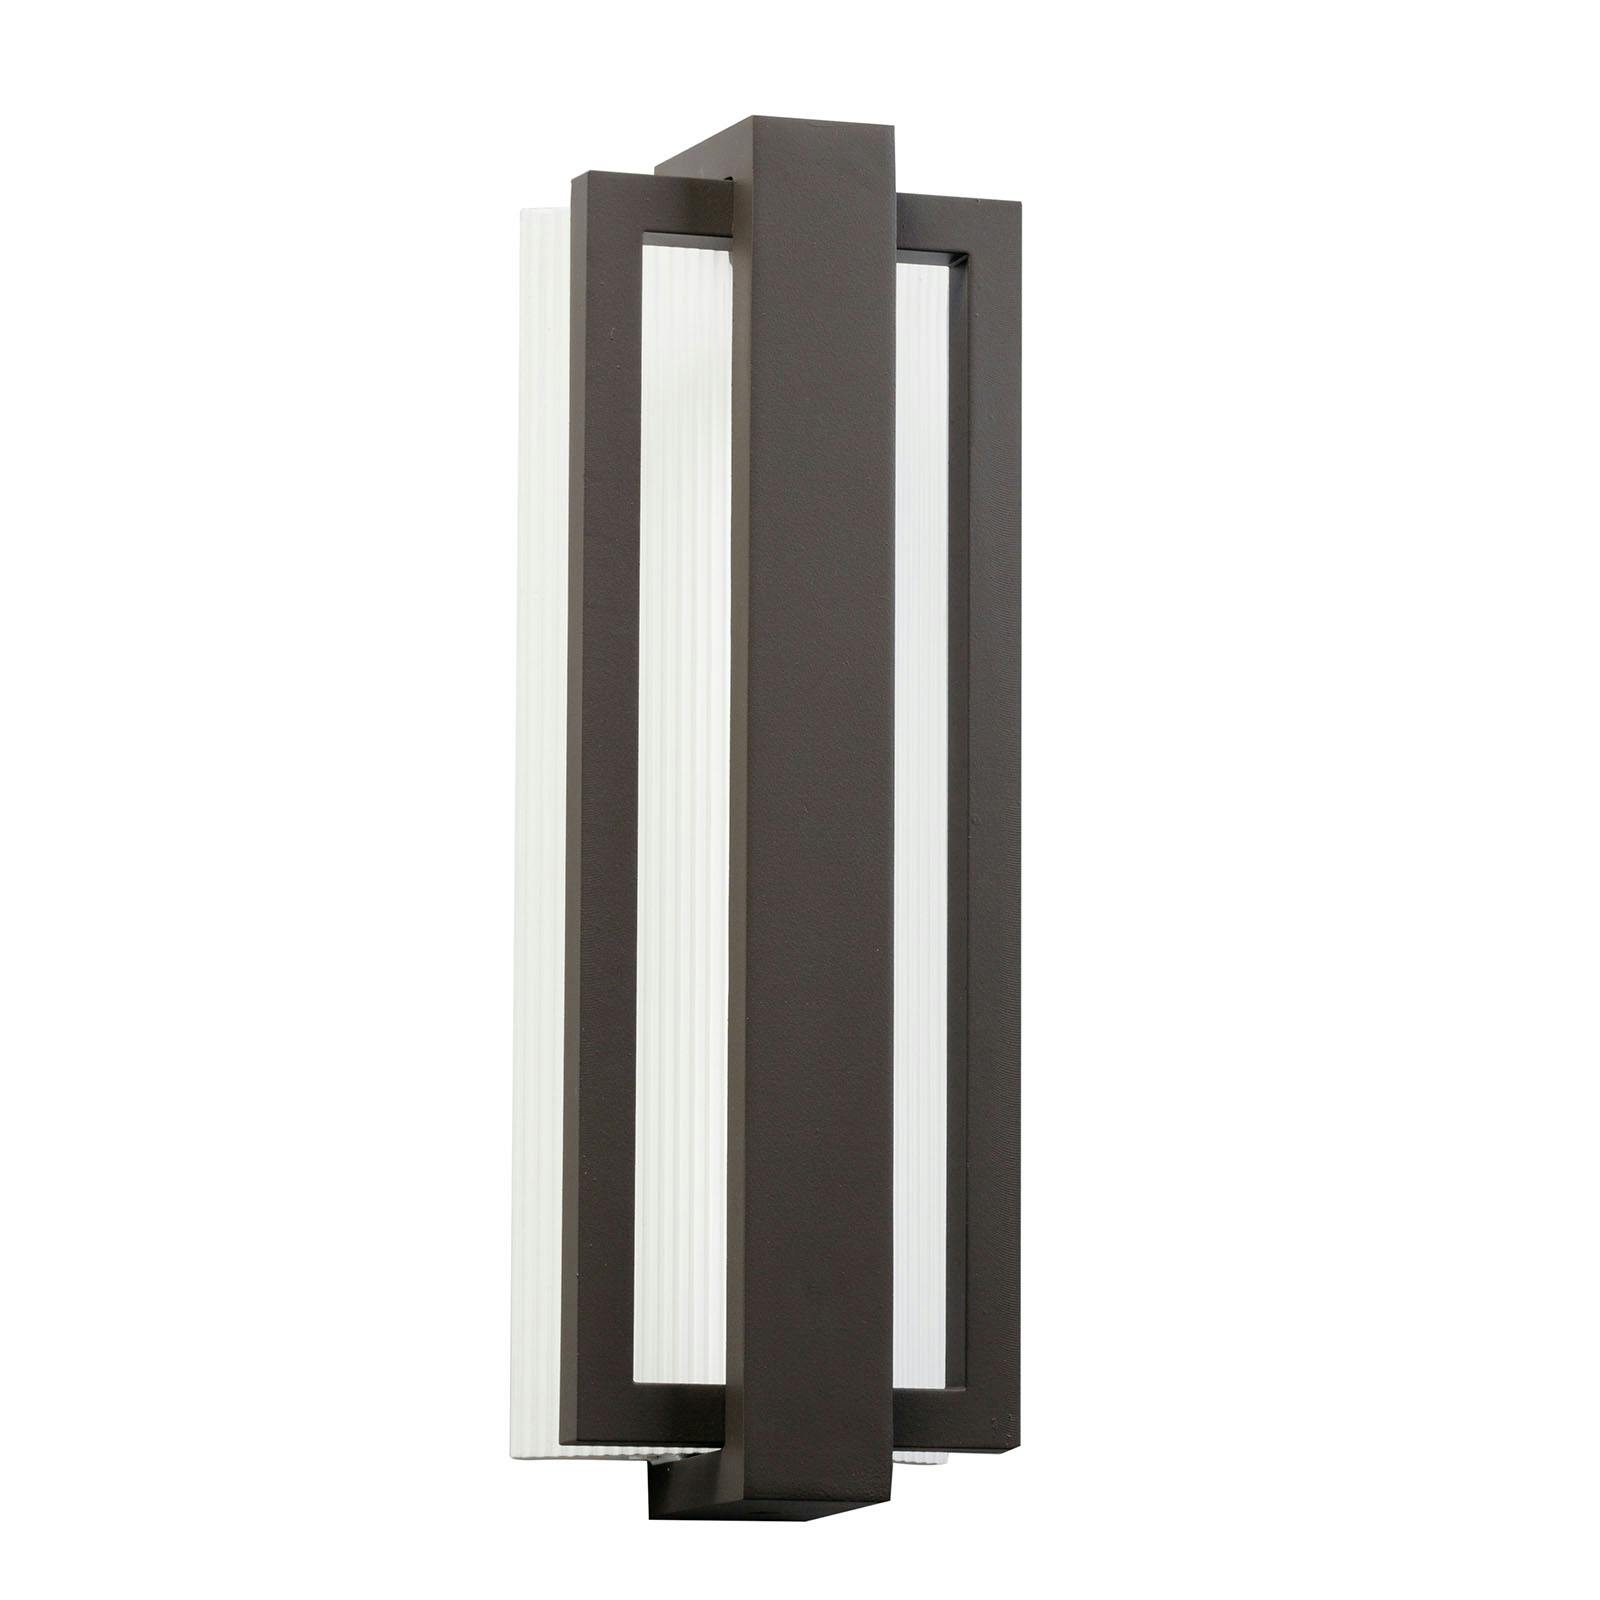 Sedo 18.25" LED Wall Light in Bronze on a white background